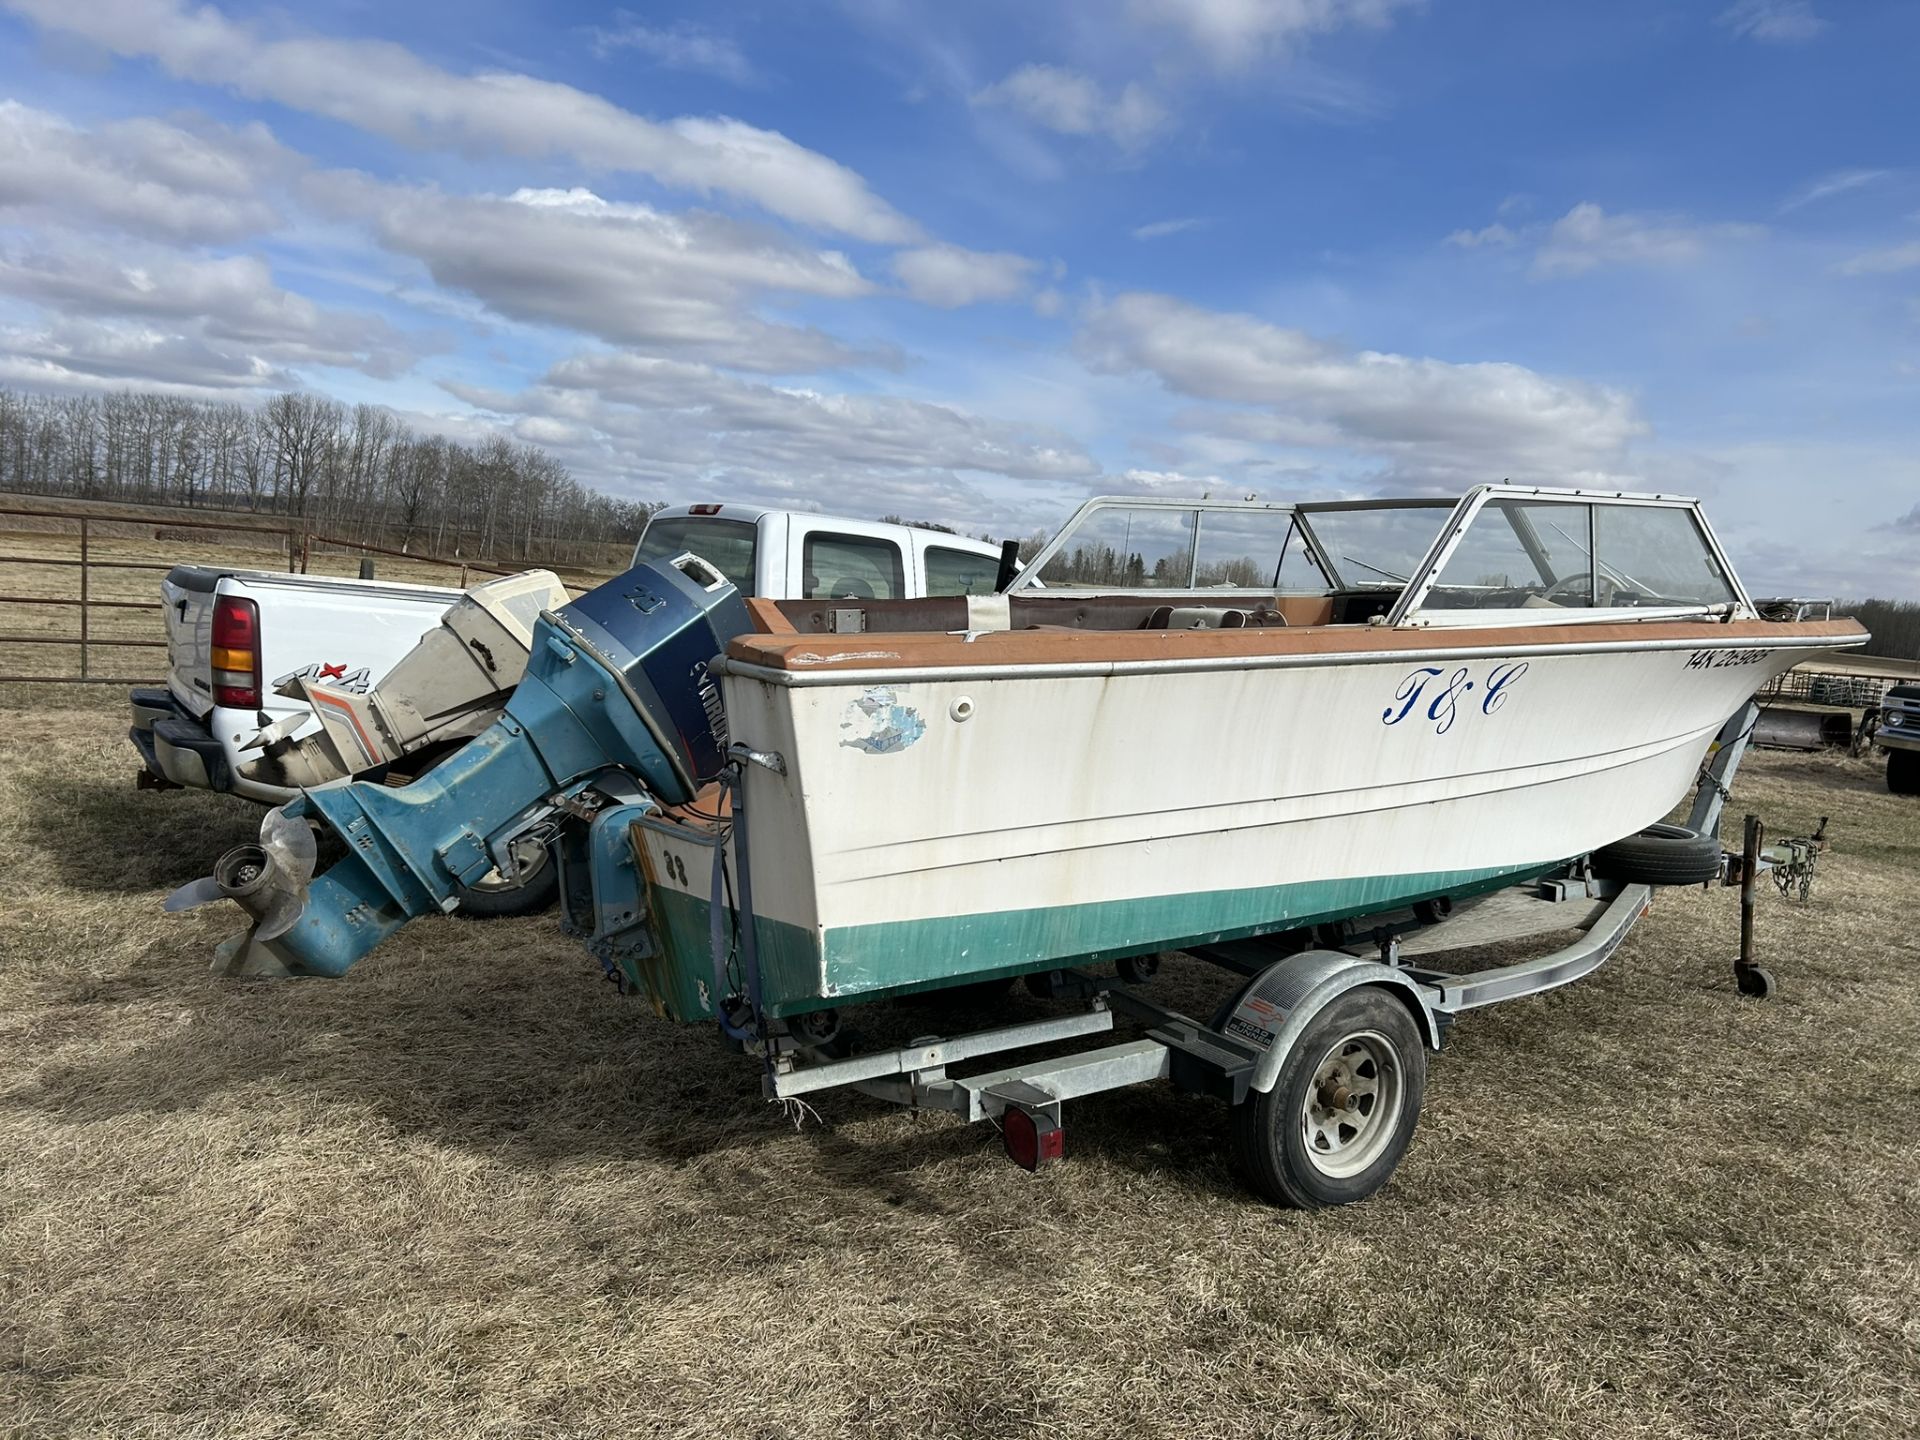 1973 DOUBLE EAGLE BOAT W/ 70 HP EVENRUDE & 10 HP CHRYSLER TROLLING MOTOR S/N ZBC039070677 AND 186 - Image 4 of 11